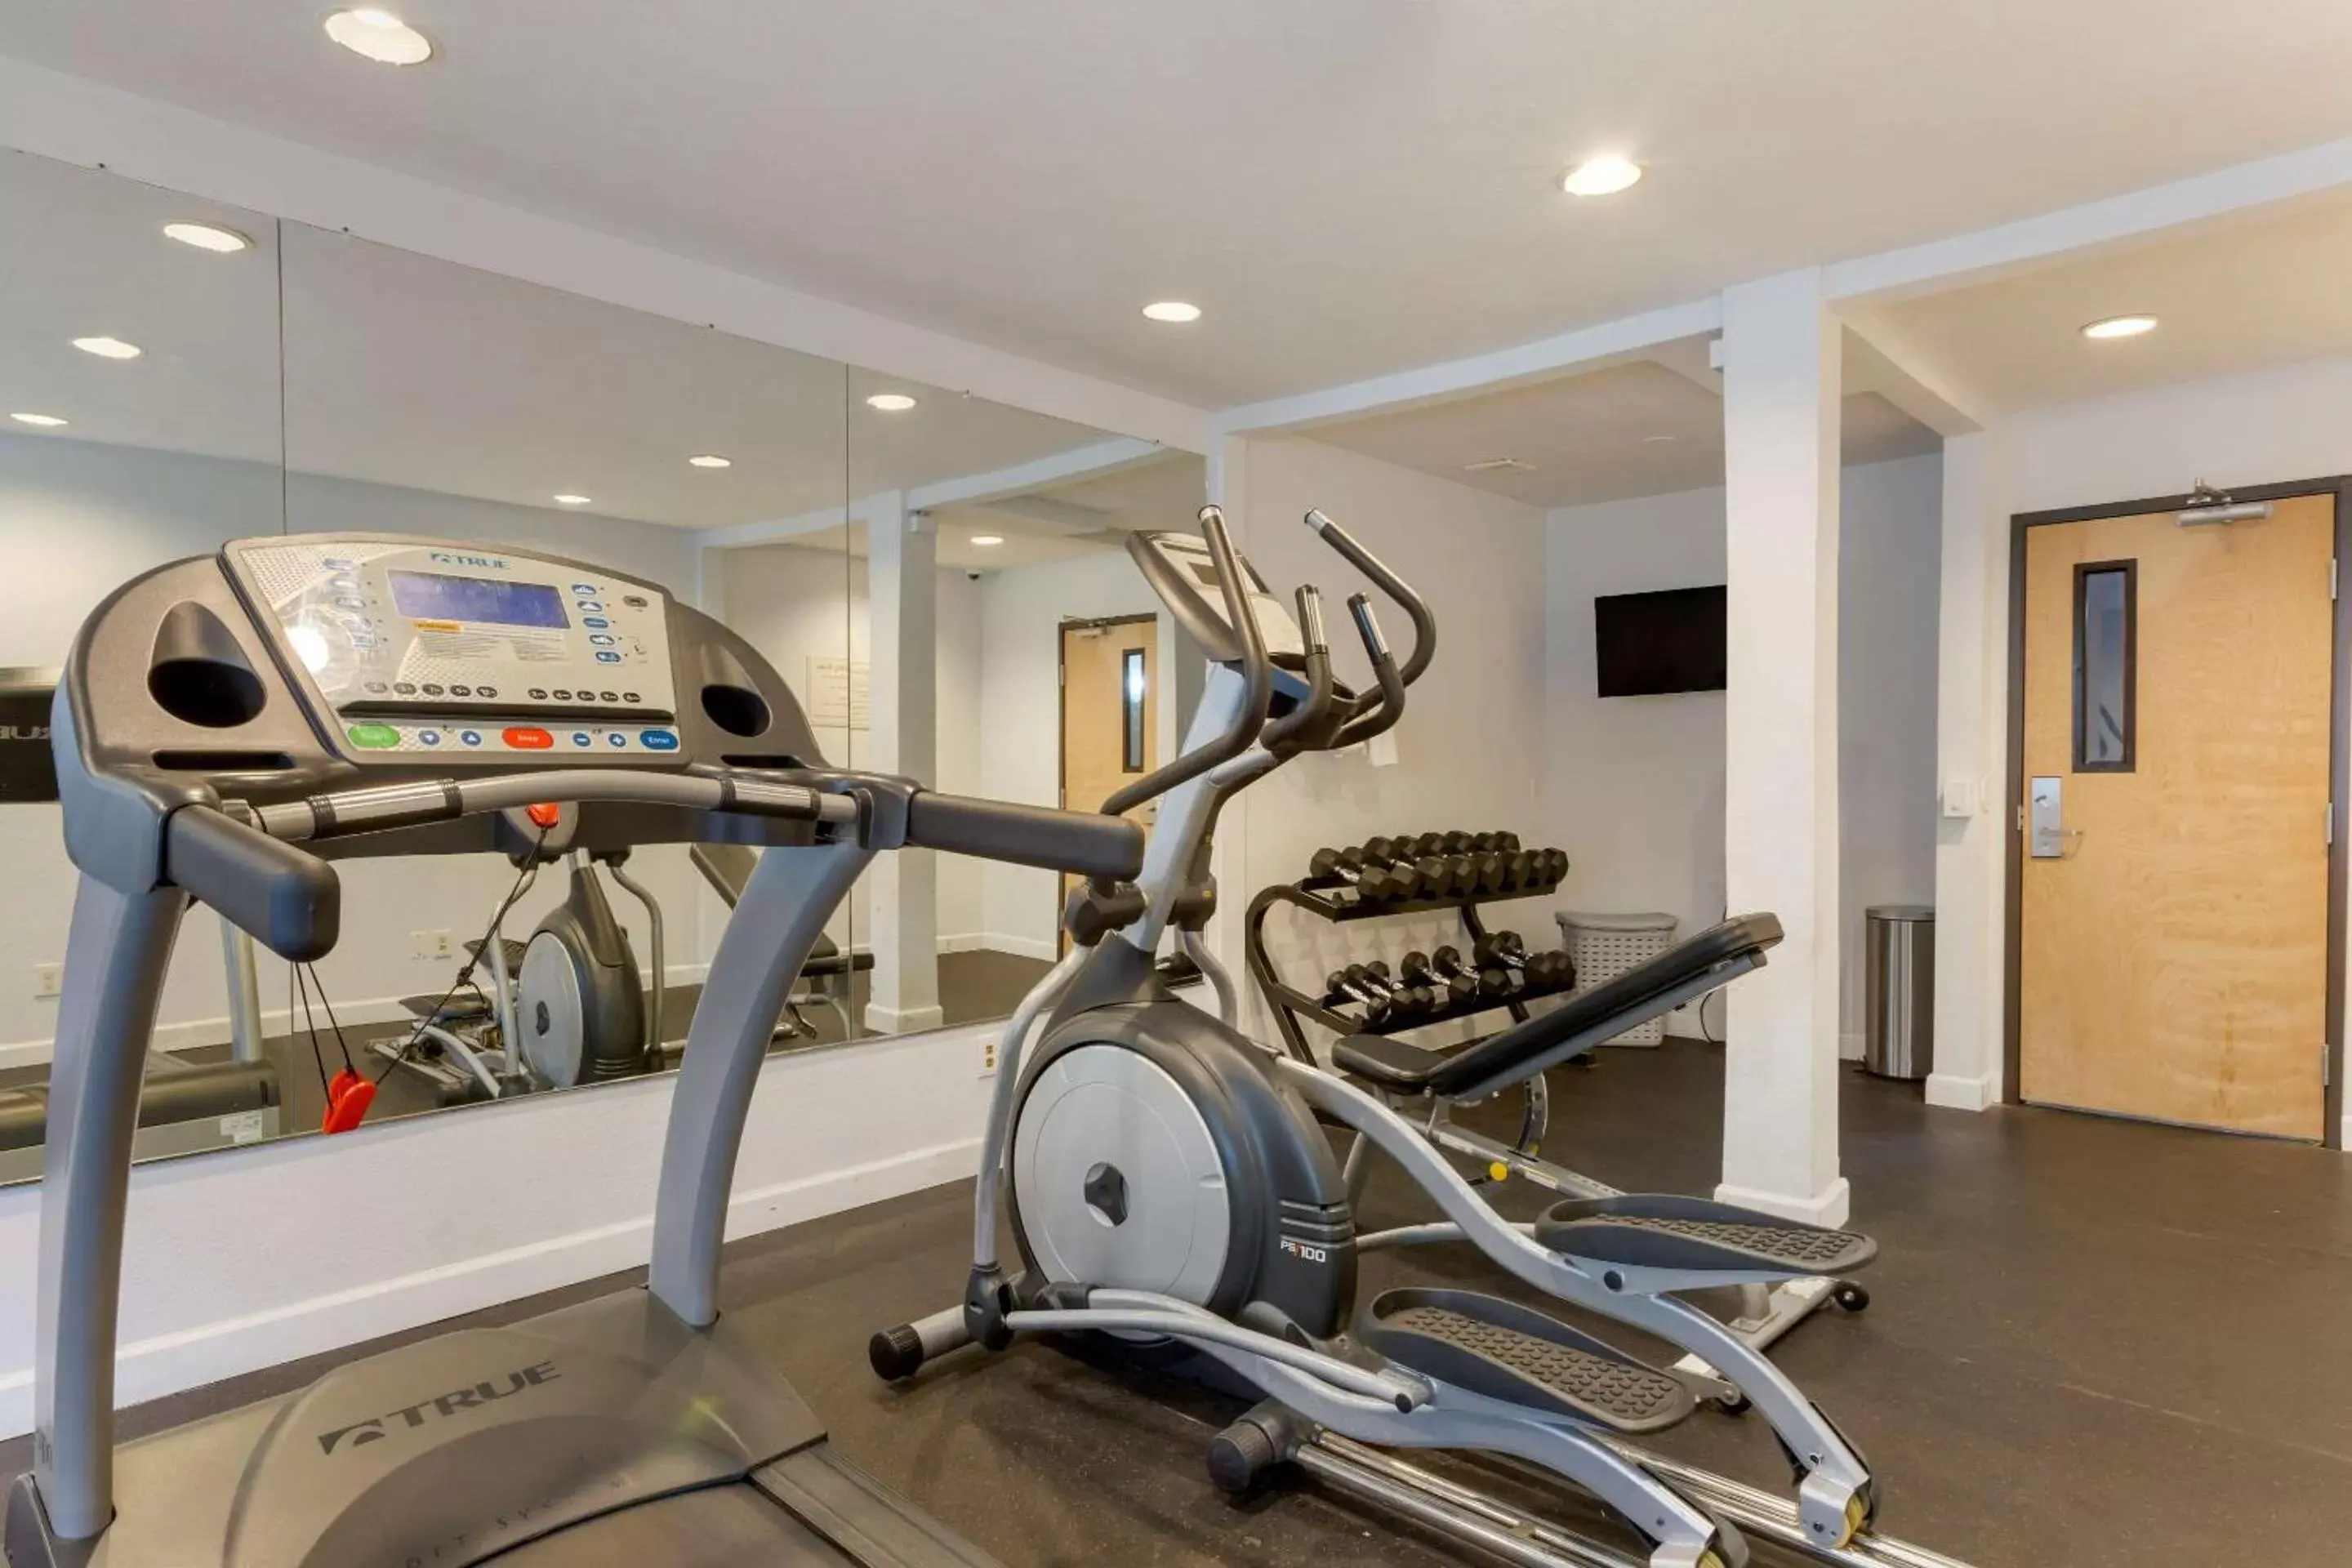 Fitness centre/facilities, Fitness Center/Facilities in Quality Inn Alexis Rd